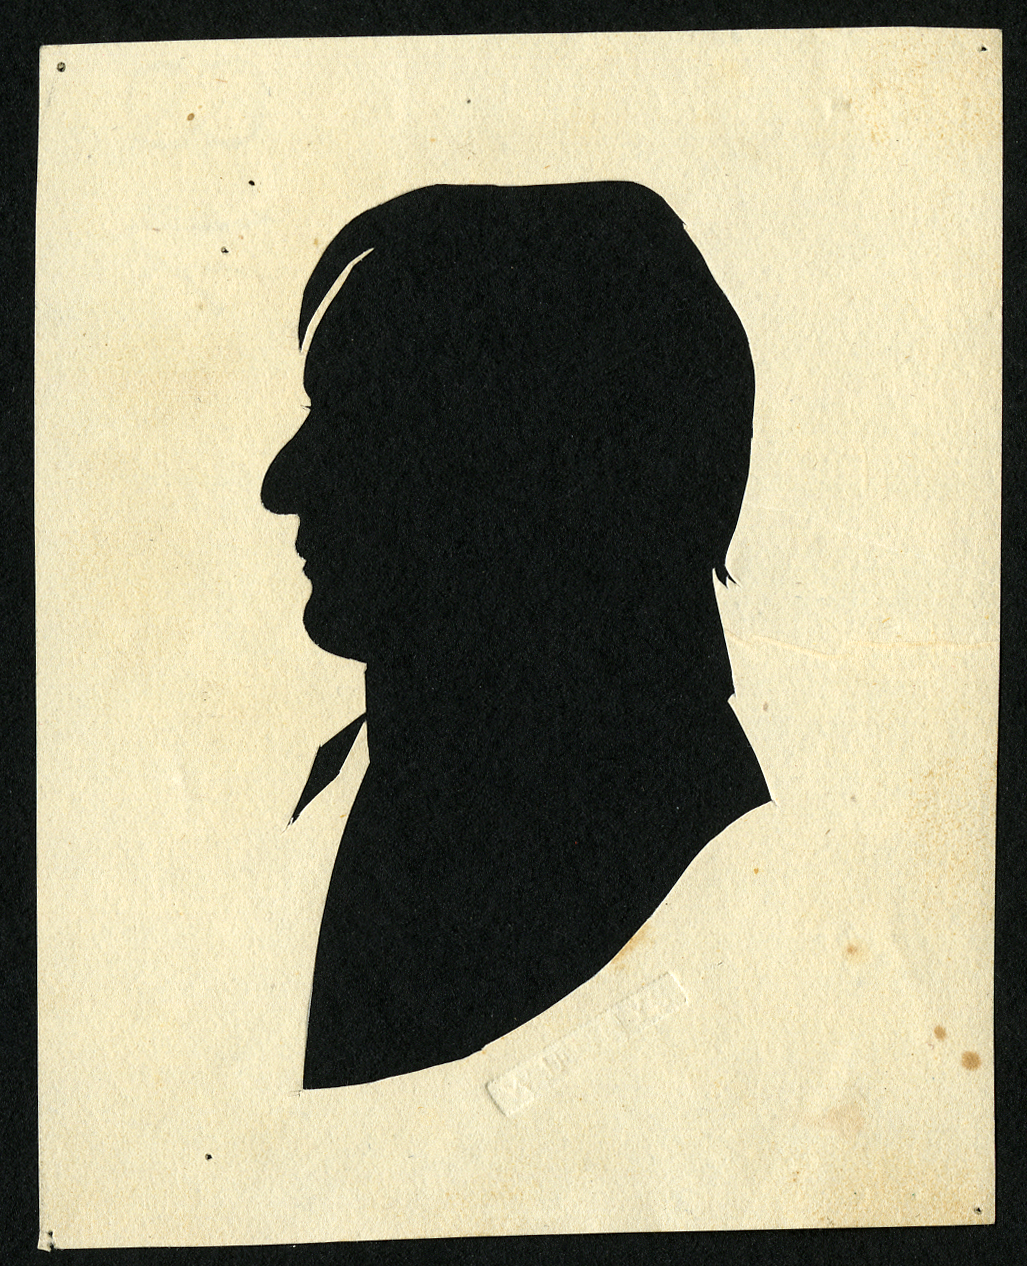 Black-and-white cut-paper silhouette of a man facing left, with details suggesting a collar and tie